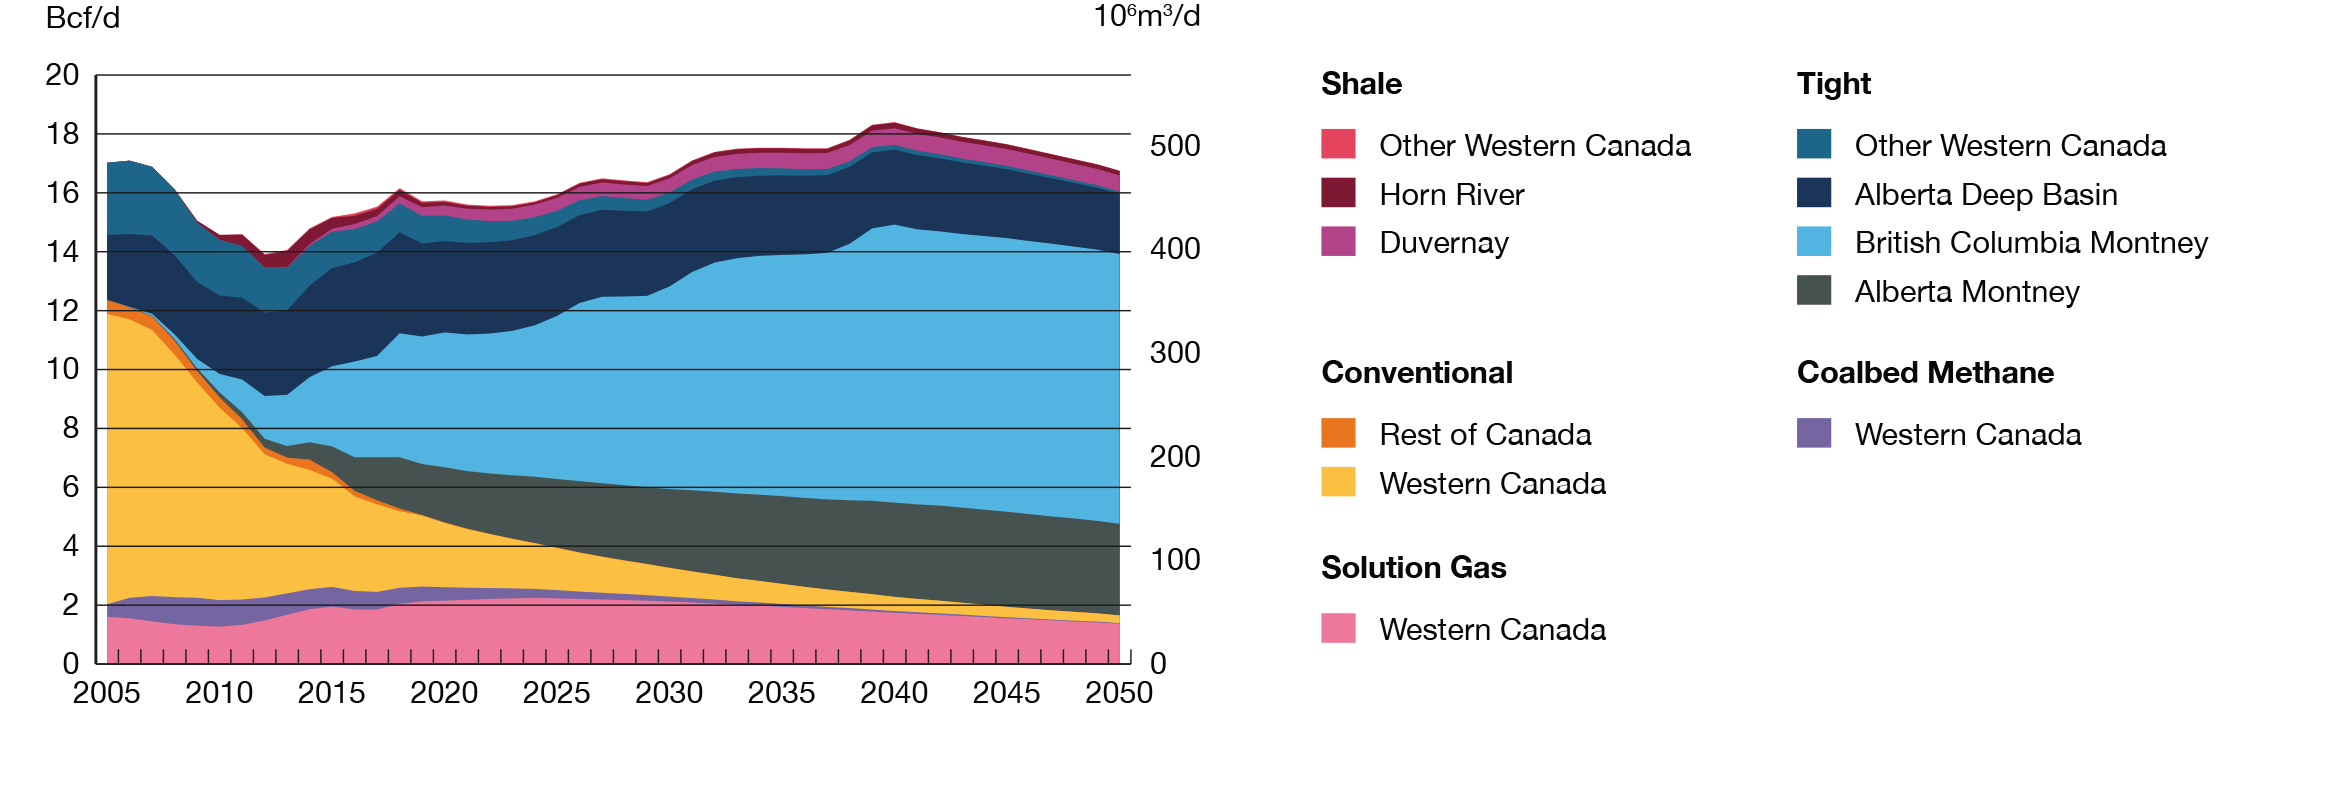 Figure R14 Natural Gas Production by Type Remains Steady, while the Montney Formation Continues to Increase, in the Evolving Scenario